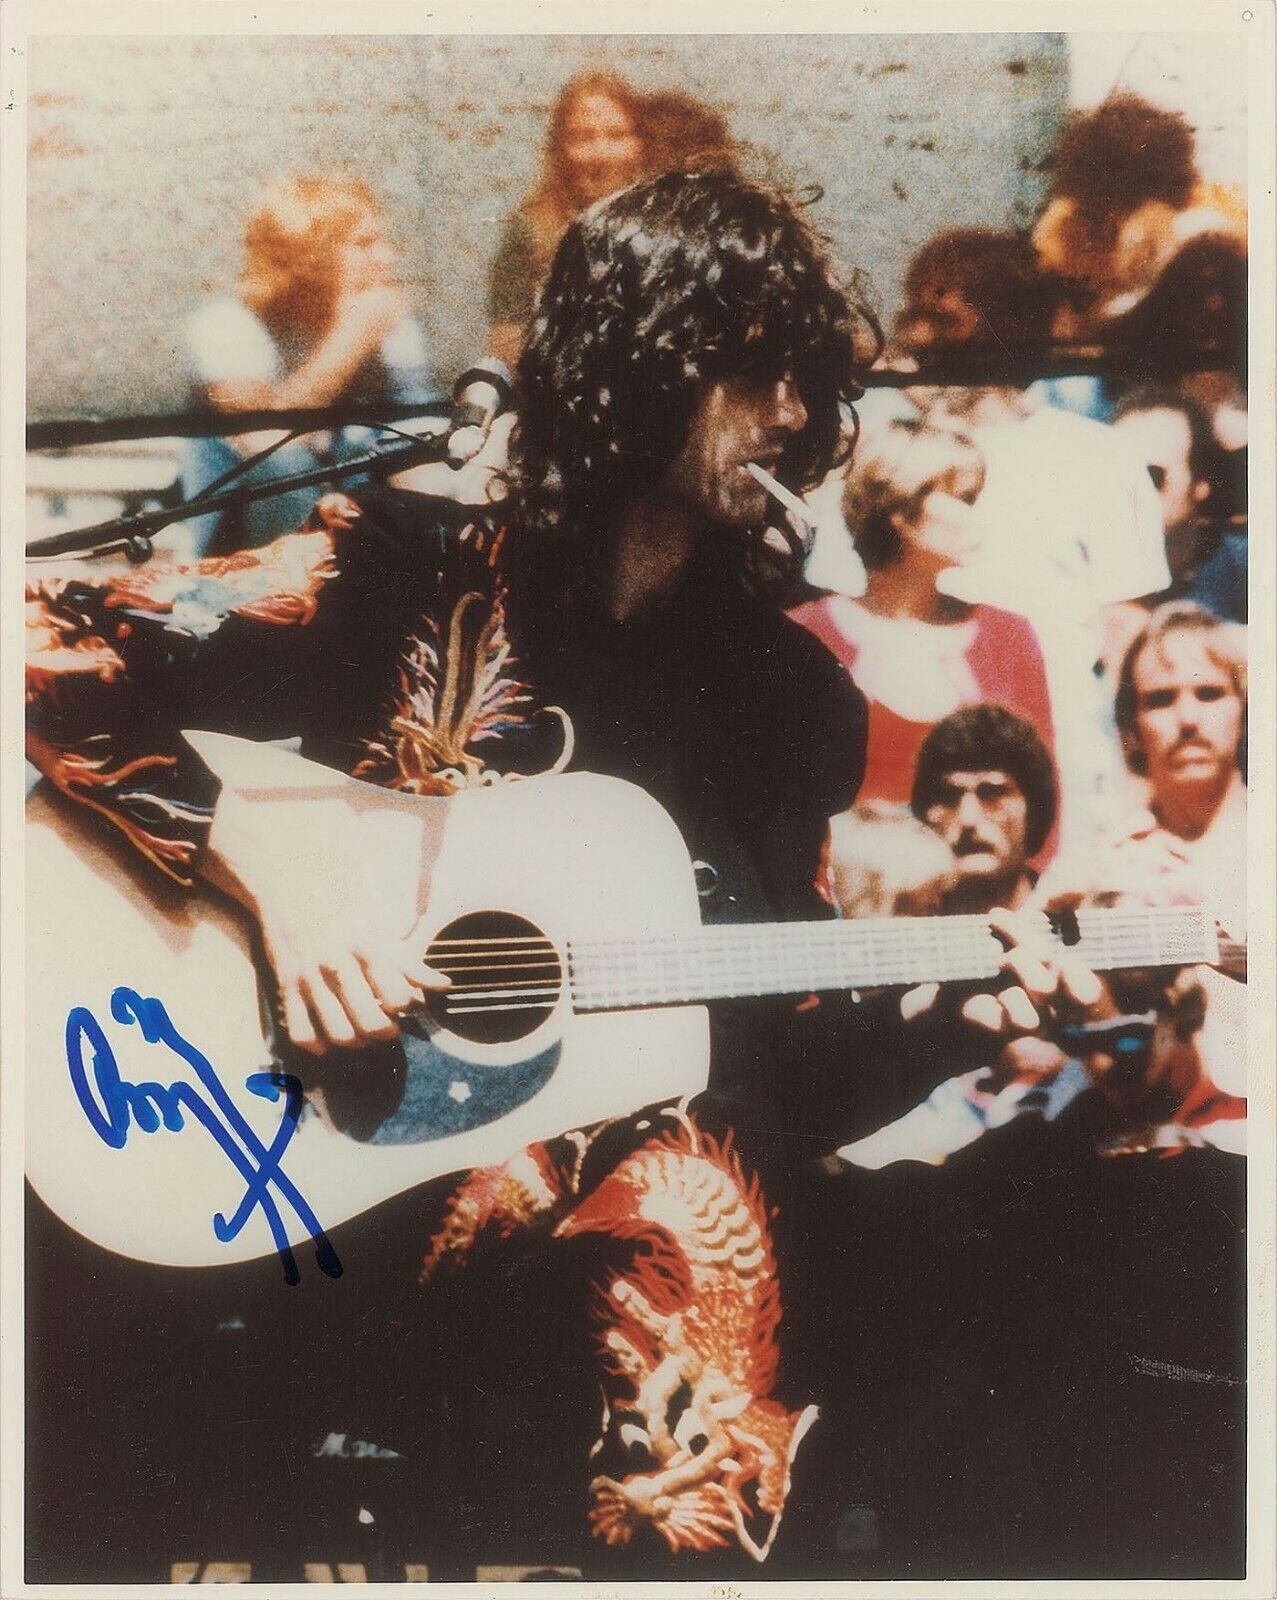 LED ZEPPELIN RARE SIGNED AUTOGRAPH 8.5X11 Photo Poster painting REPRINT JIMMY PAGE ROBERT PLANT